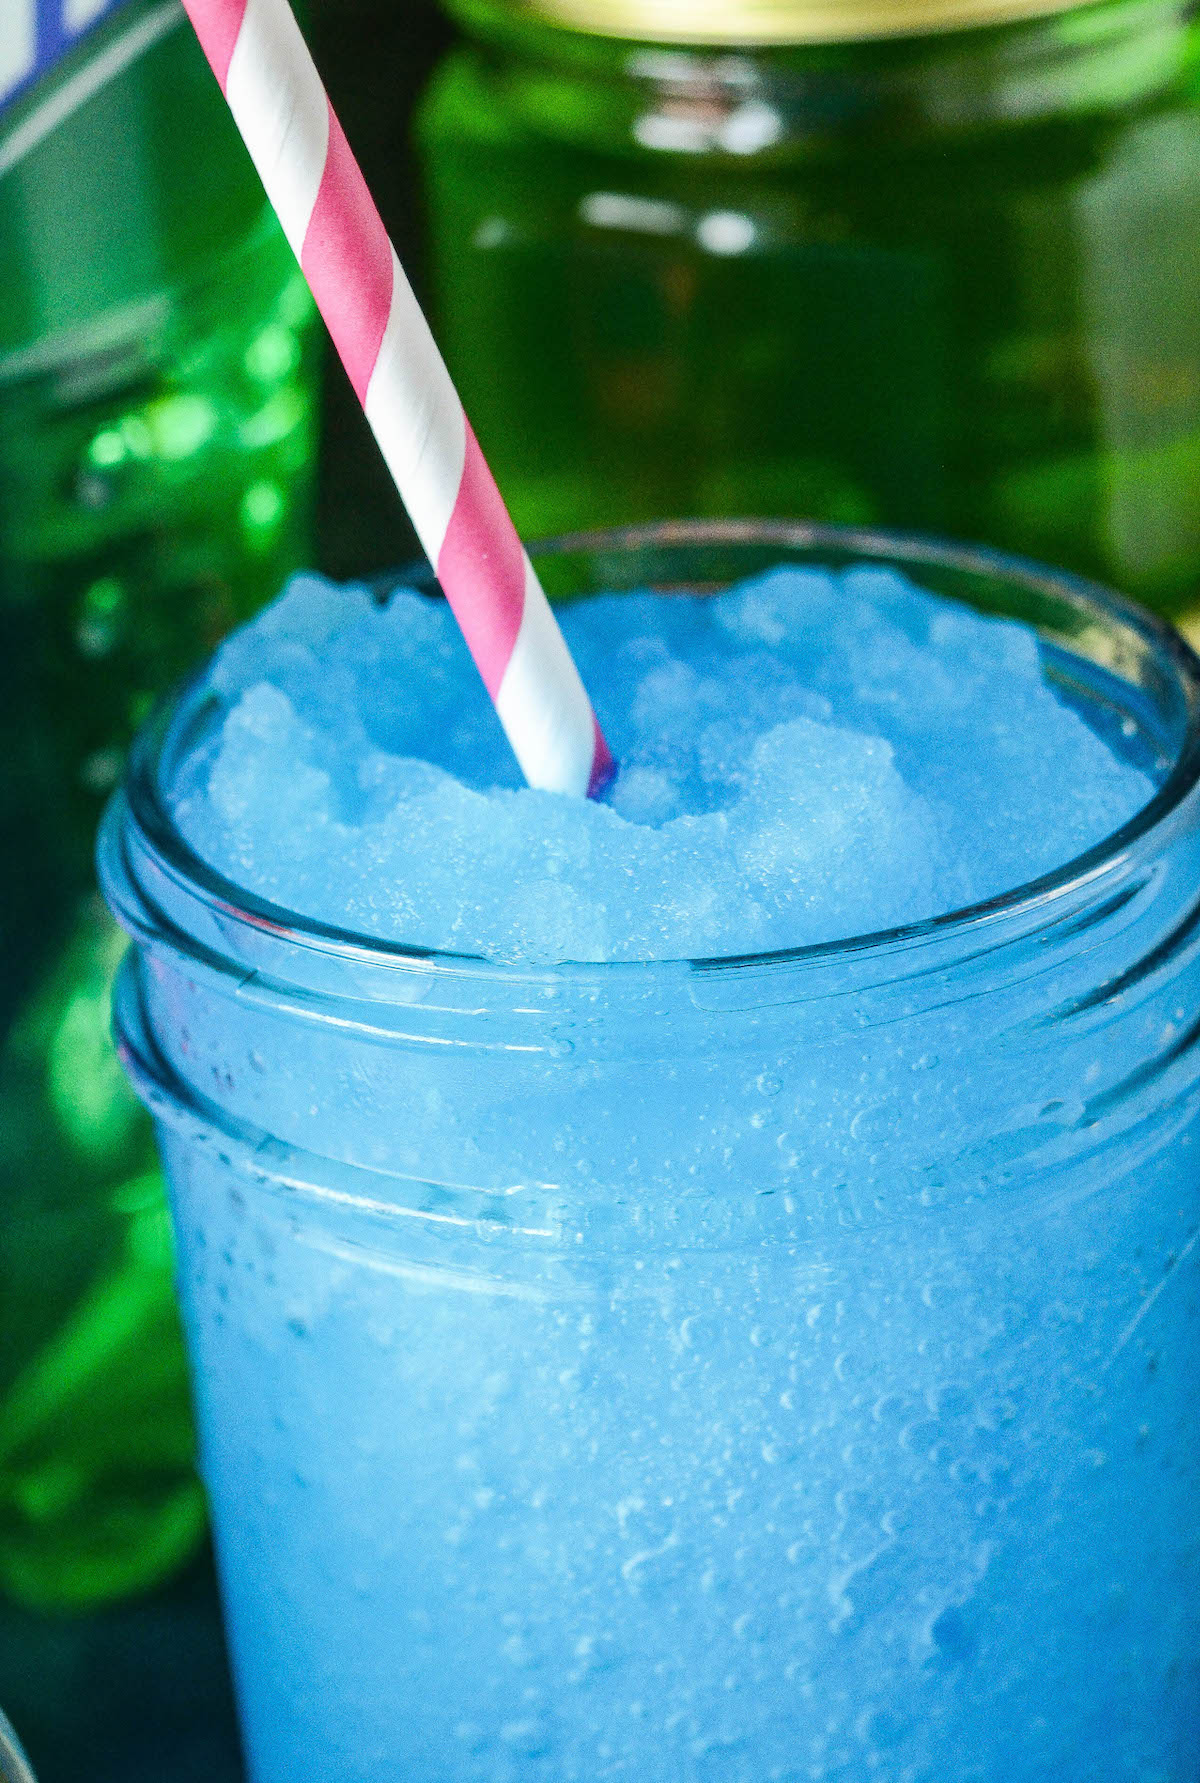 Up close image of a blue boozy slushie with a pink straw.